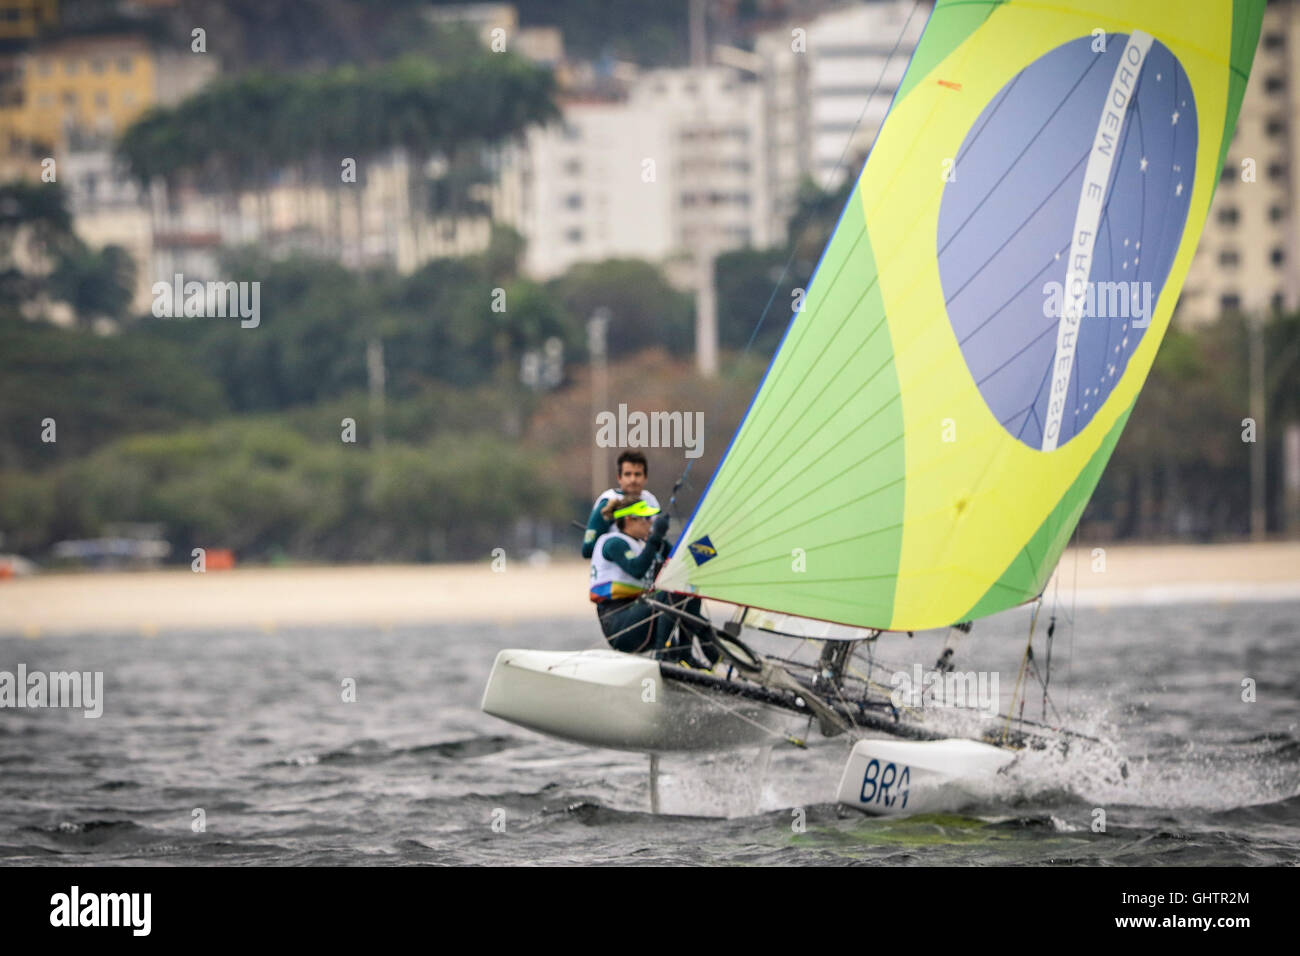 Rio De Janeiro, Brazil. 10th August, 2016. 2016 SAILING OLYMPICS - Samuel Albrecht and Isabel Swan (BRA) during the candle Rio Olympics 2016 held at Marina da Glória, in Guanabara Bay. Credit:  Foto Arena LTDA/Alamy Live News Stock Photo